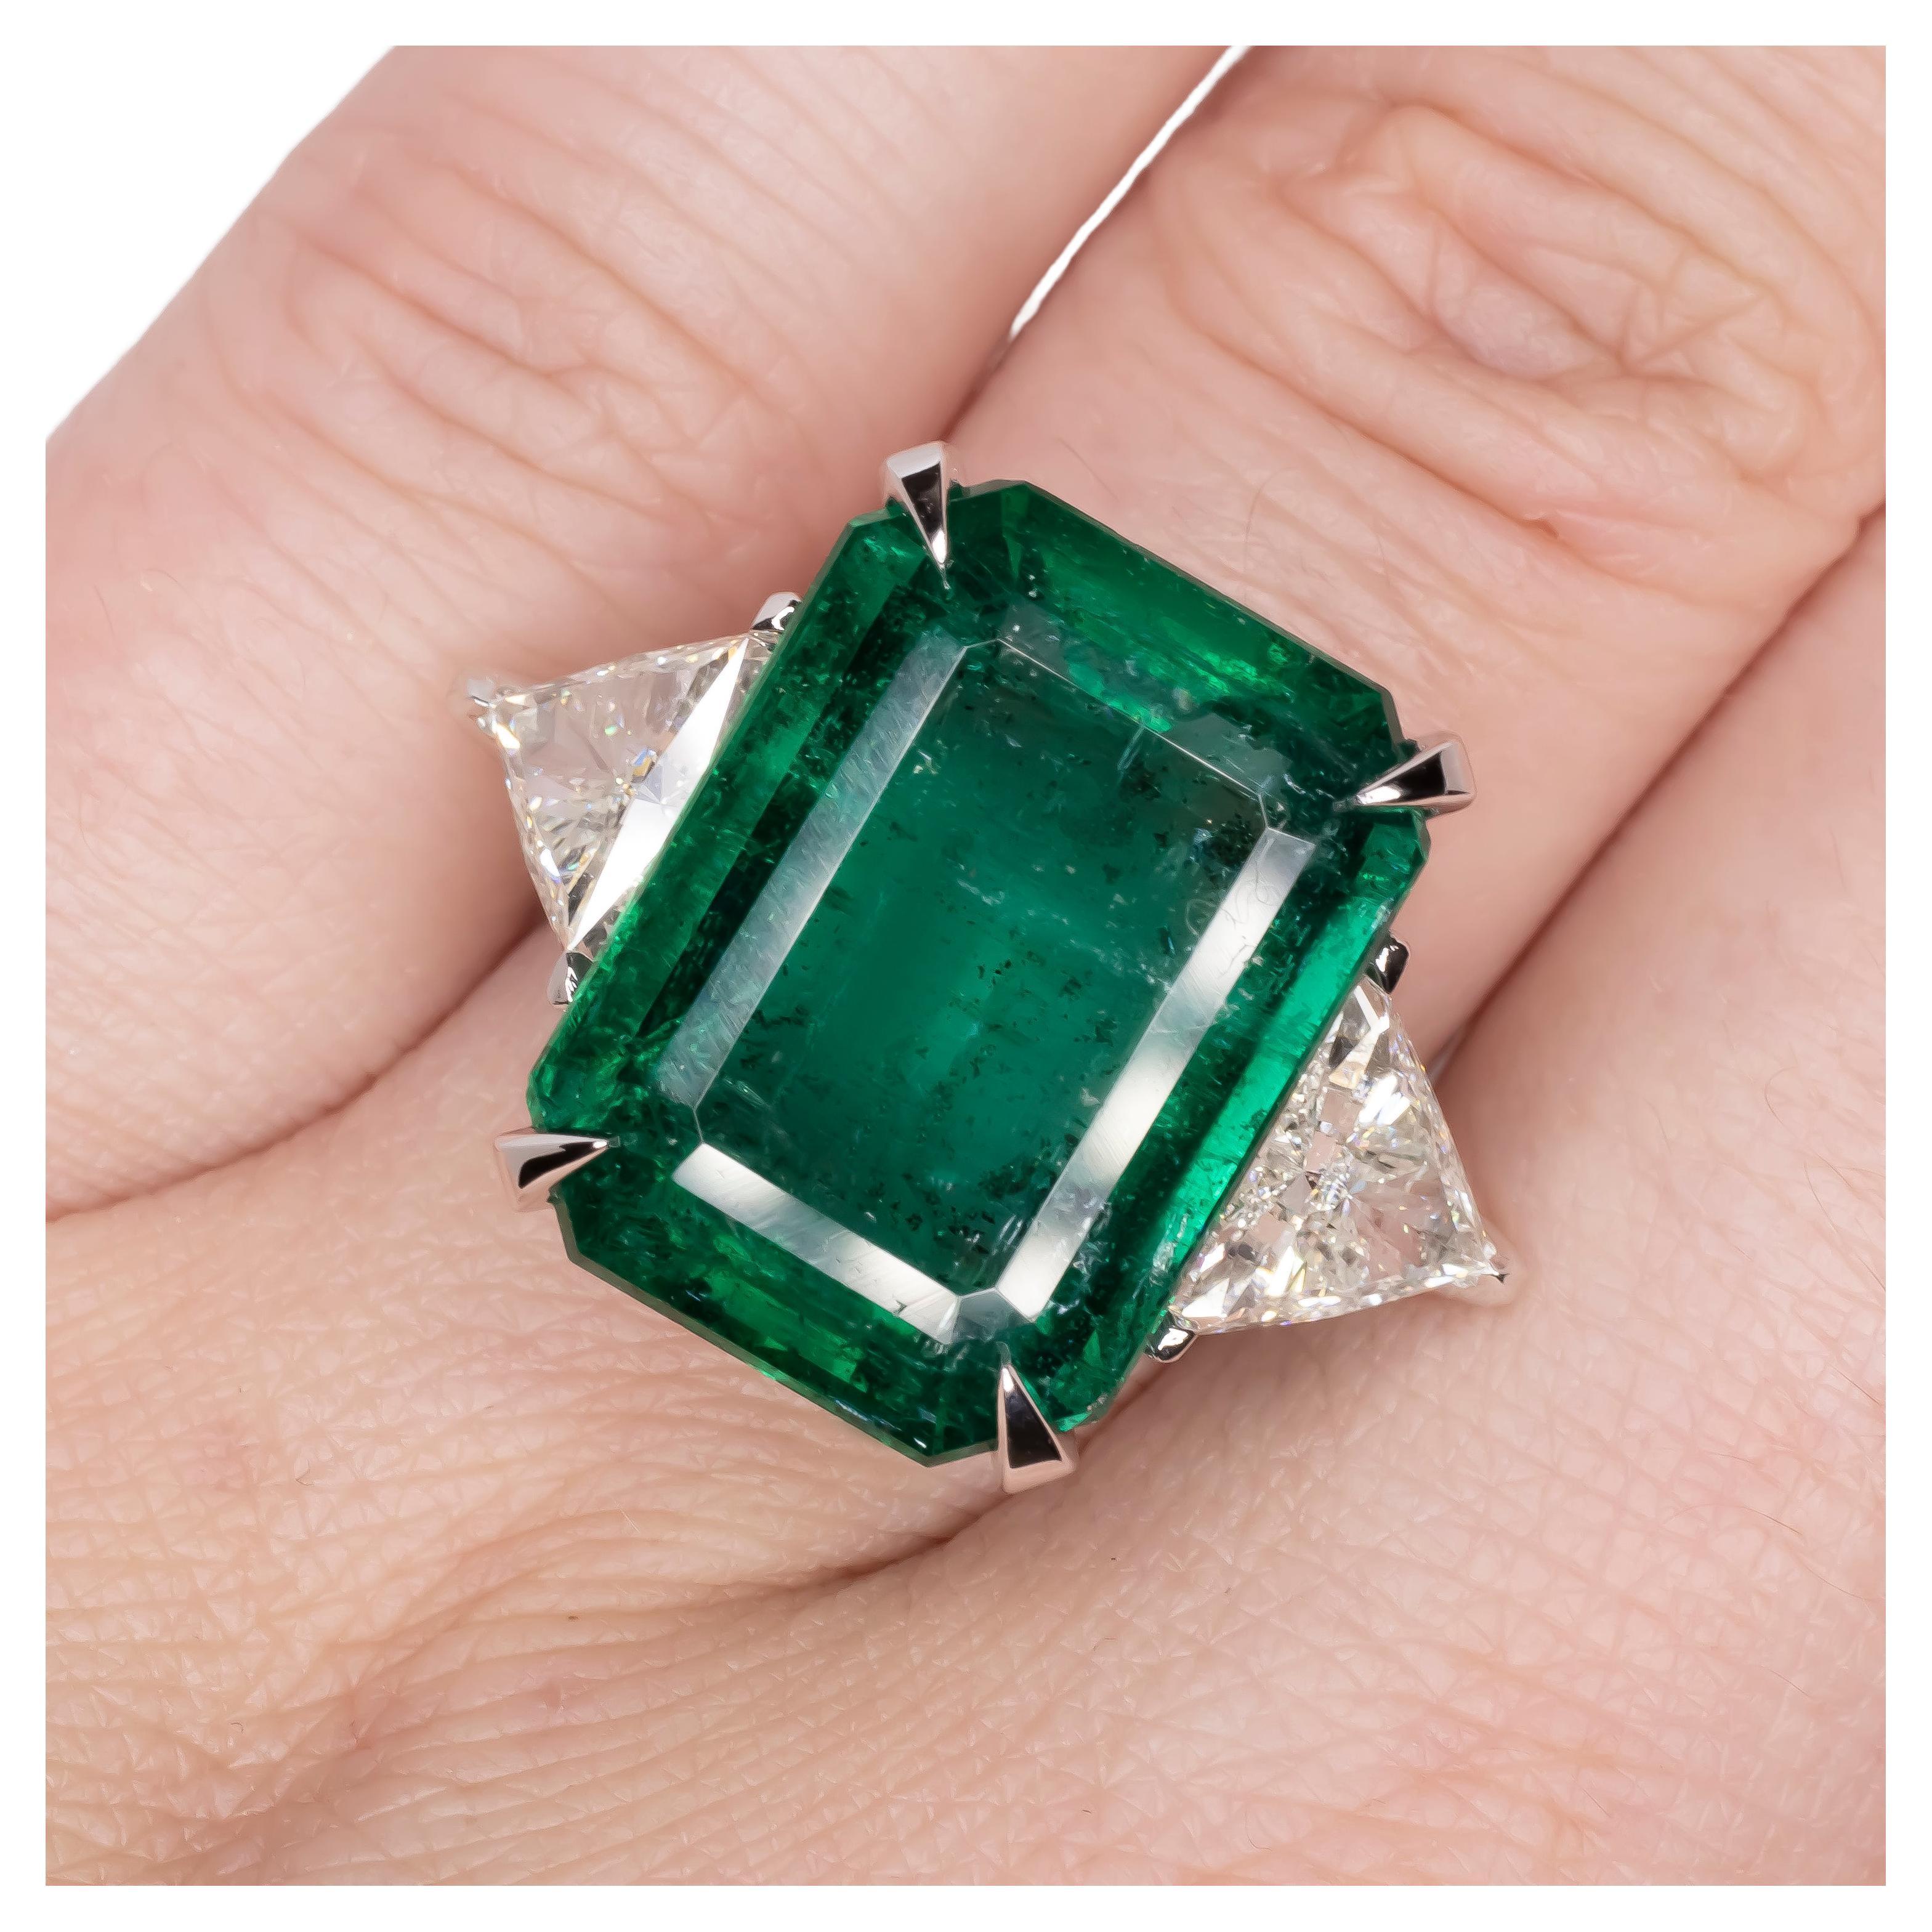 Introducing an exceptional GIA certified 16.93 carat emerald and diamond ring, a true testament to the splendor of fine jewelry. This ring is centered around a magnificent green emerald with a minor oil enhancement, which speaks to its authenticity